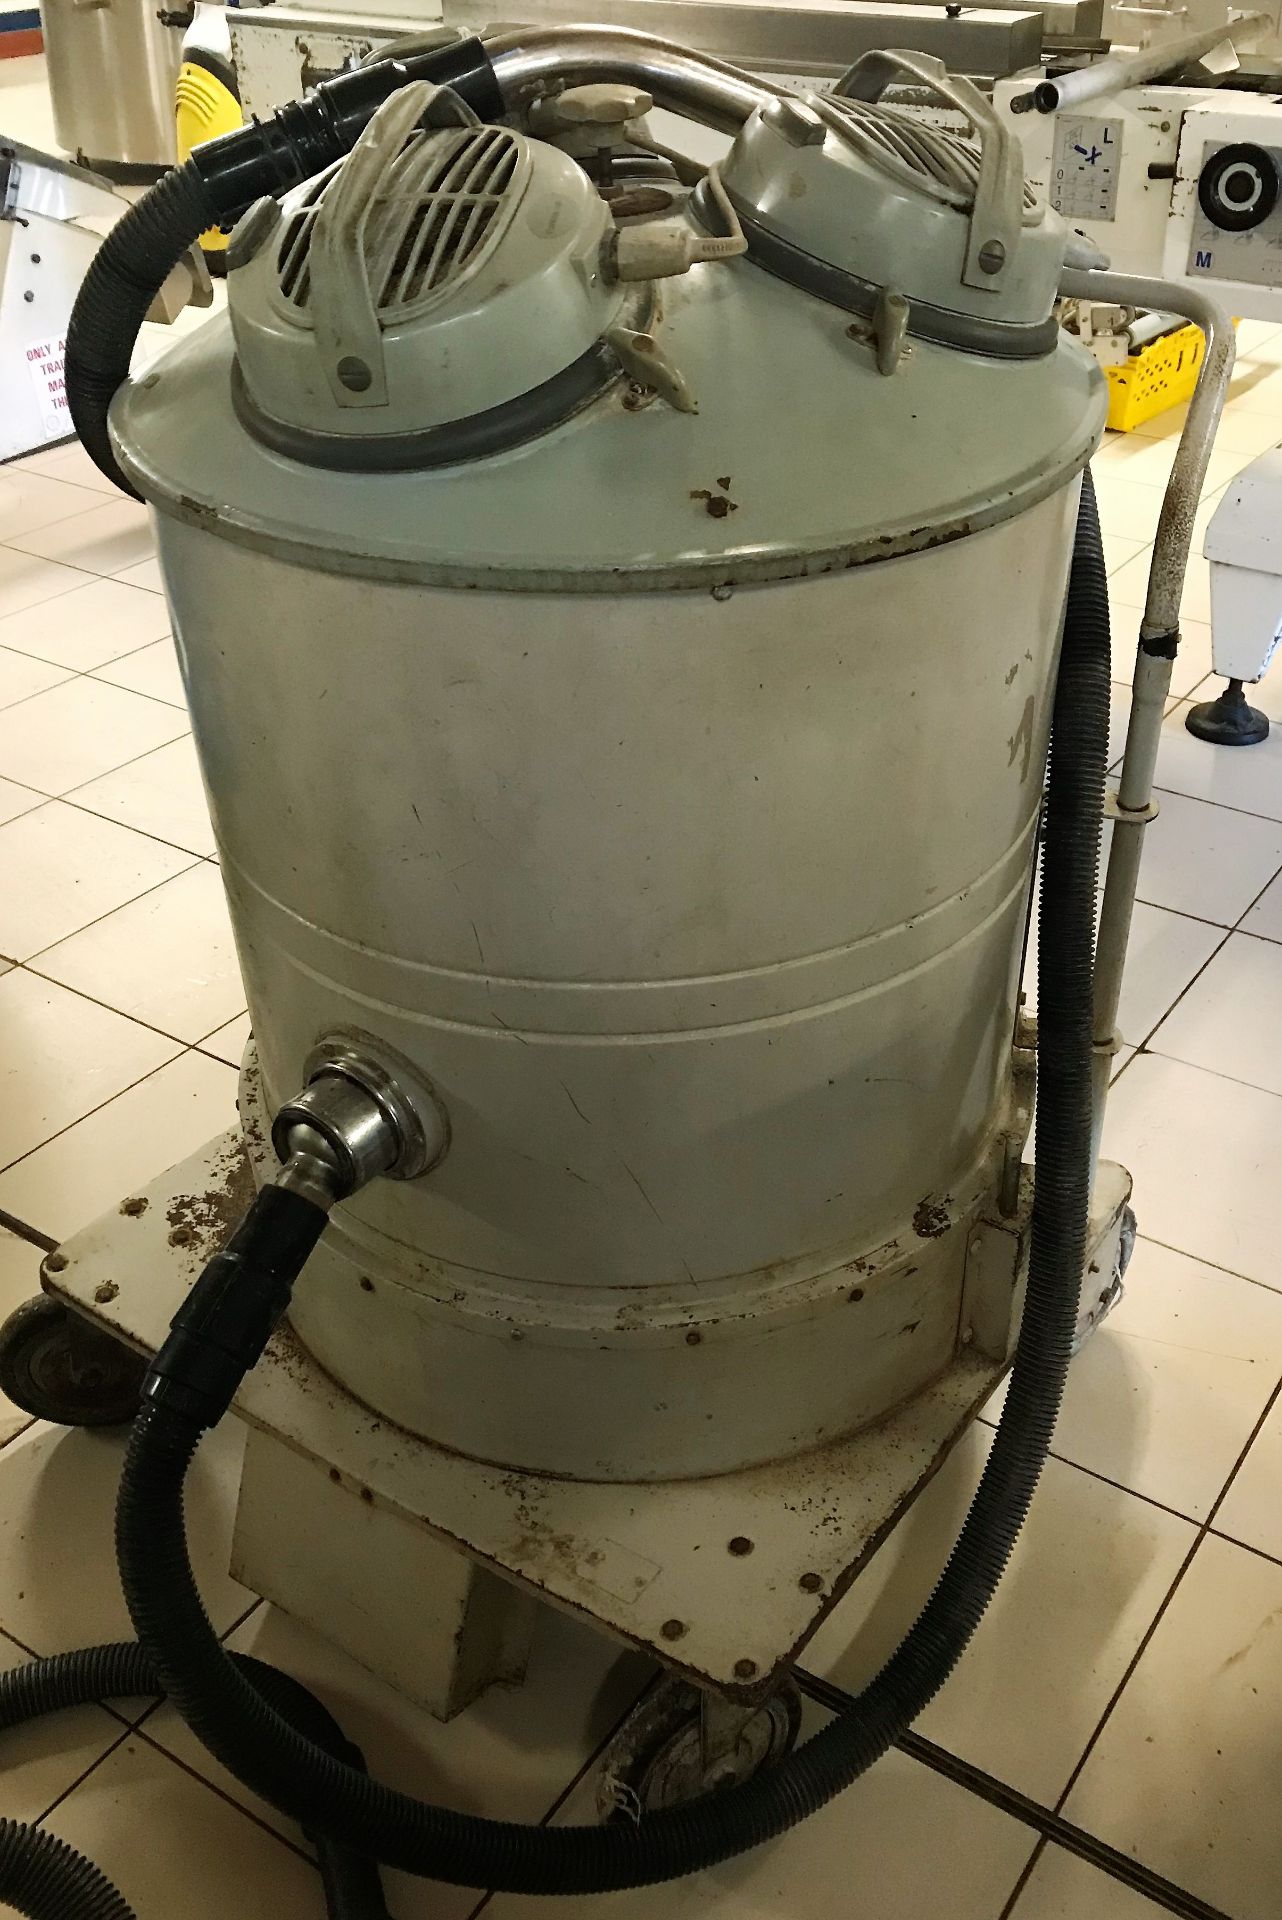 A Nilfisk GMP Industrial Vacuum Cleaner (1ph).